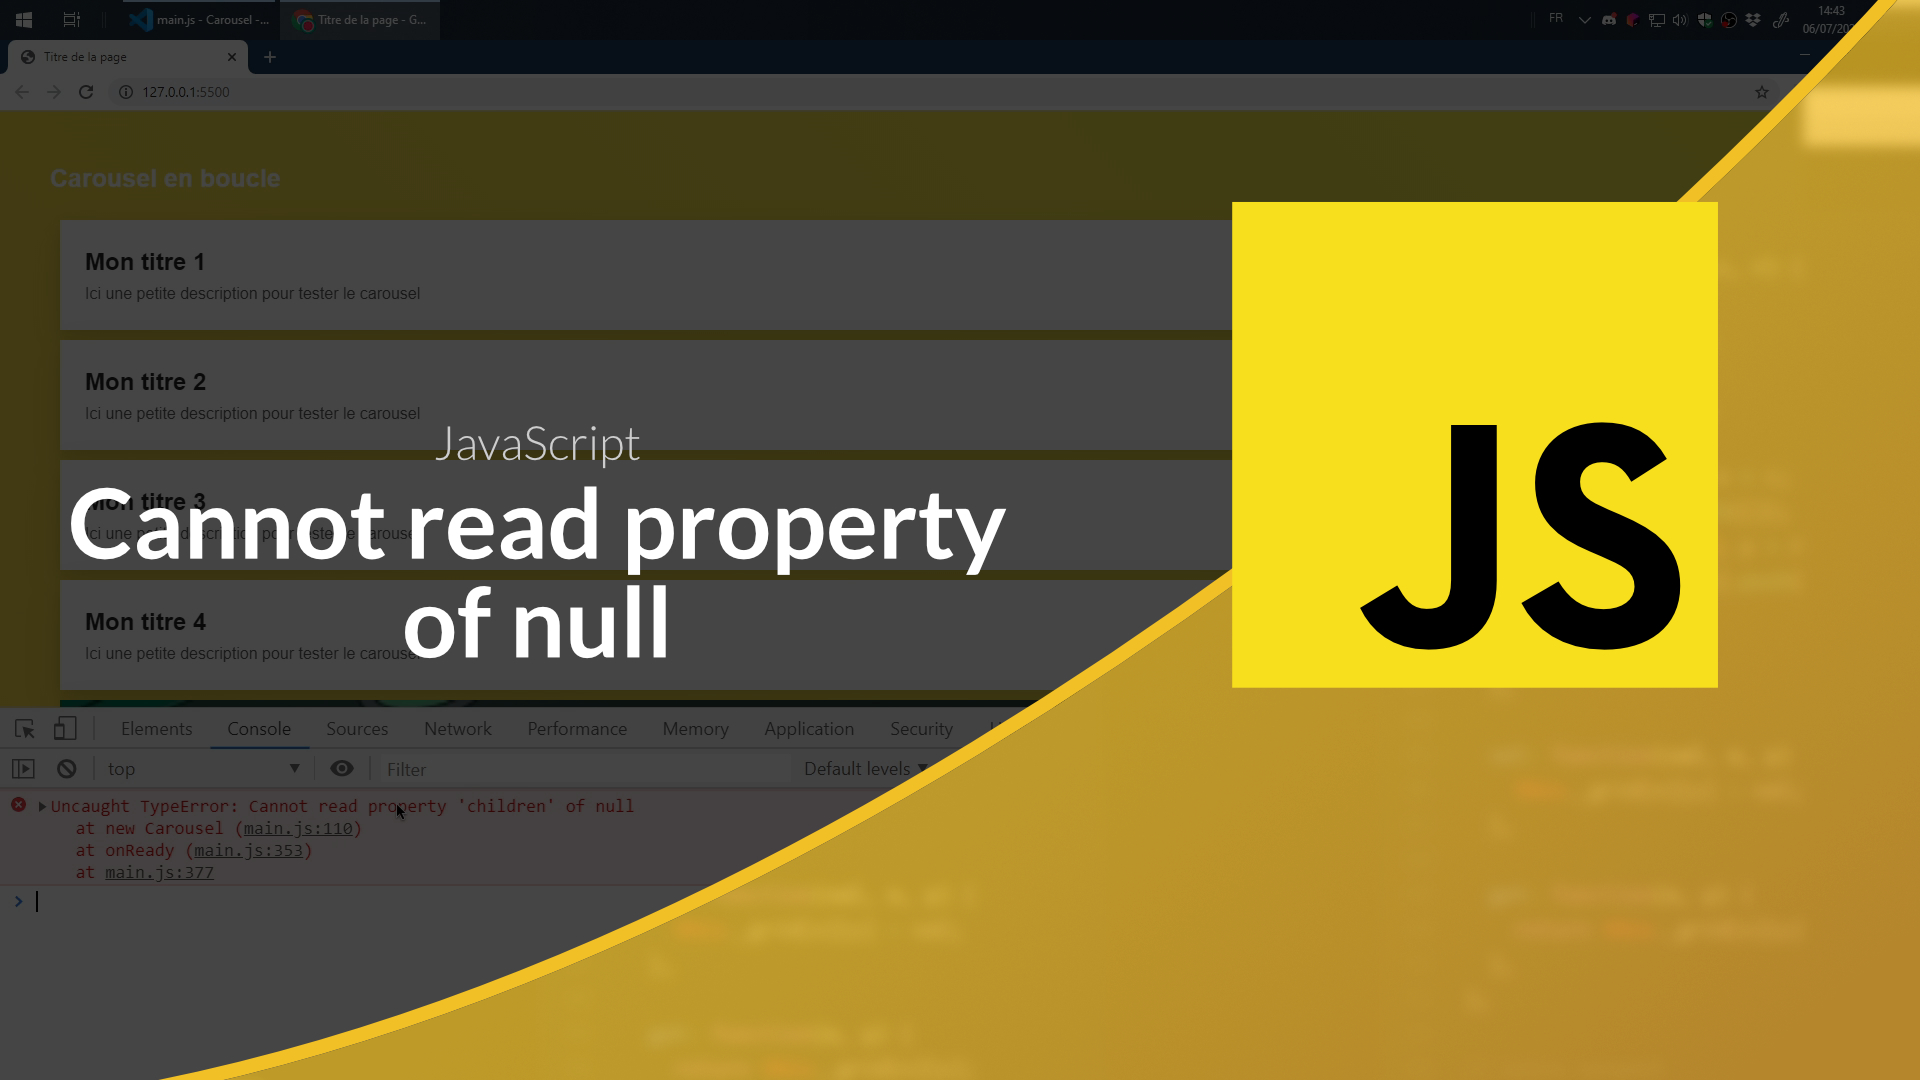 REGENERATORRUNTIME is not defined. Cannot read properties of null reading ADDEVENTLISTENER. Cant read. Null picture.